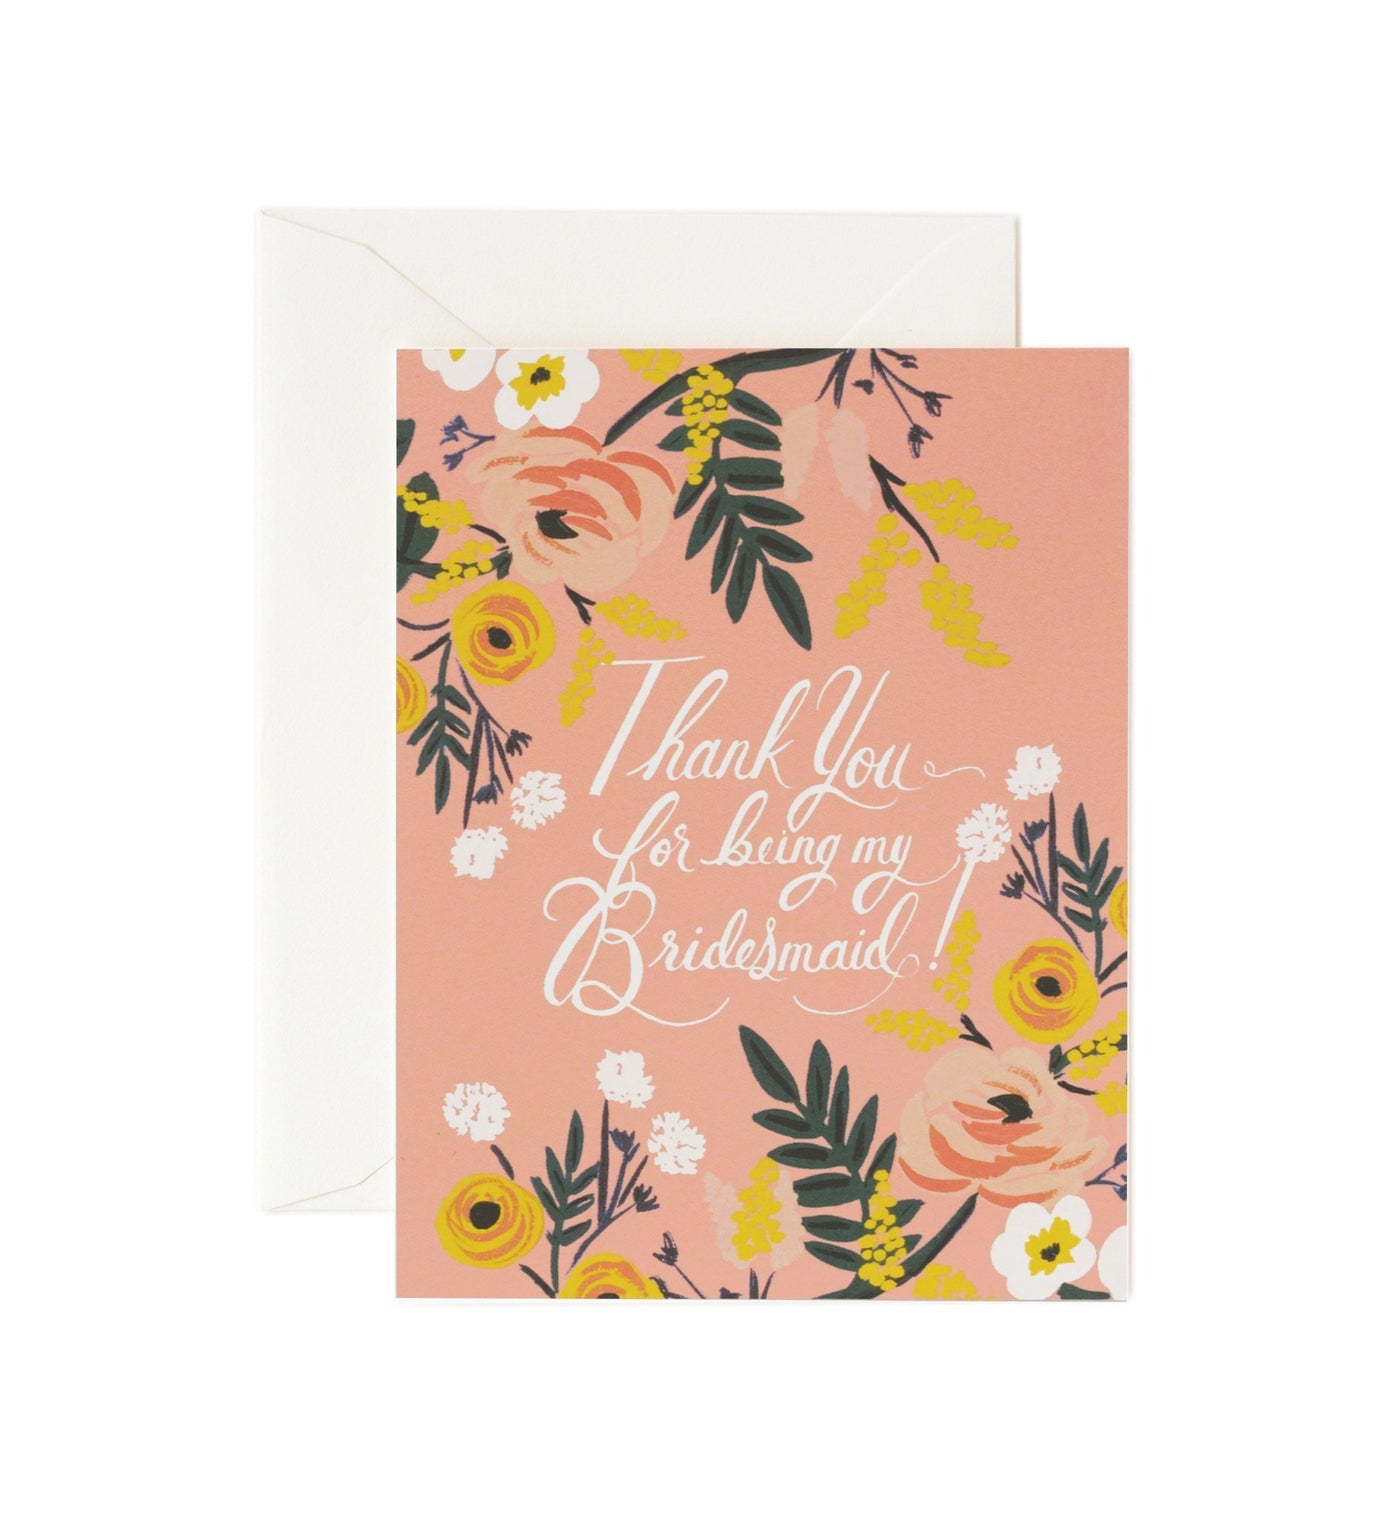 Thank You Bridesmaid - Greetings Card by Rifle Paper Co